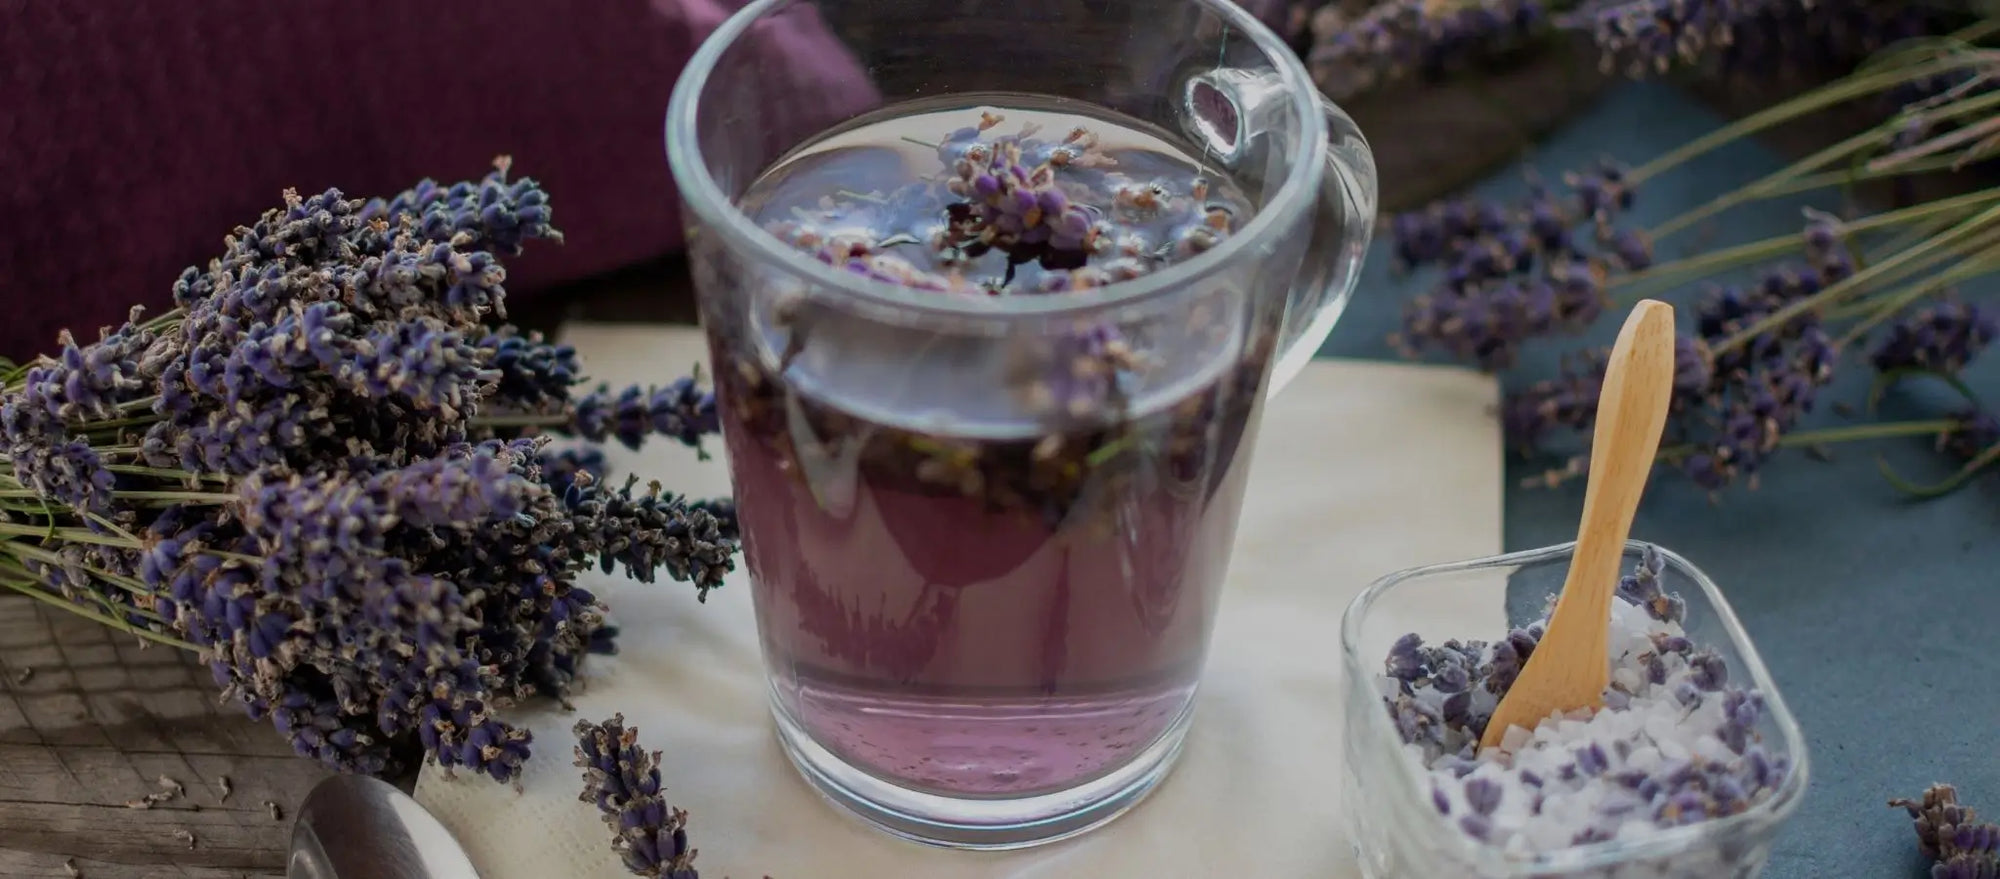 10 Spiritual Meanings of Lavender - lavender spiritual meaning info with the purple plant